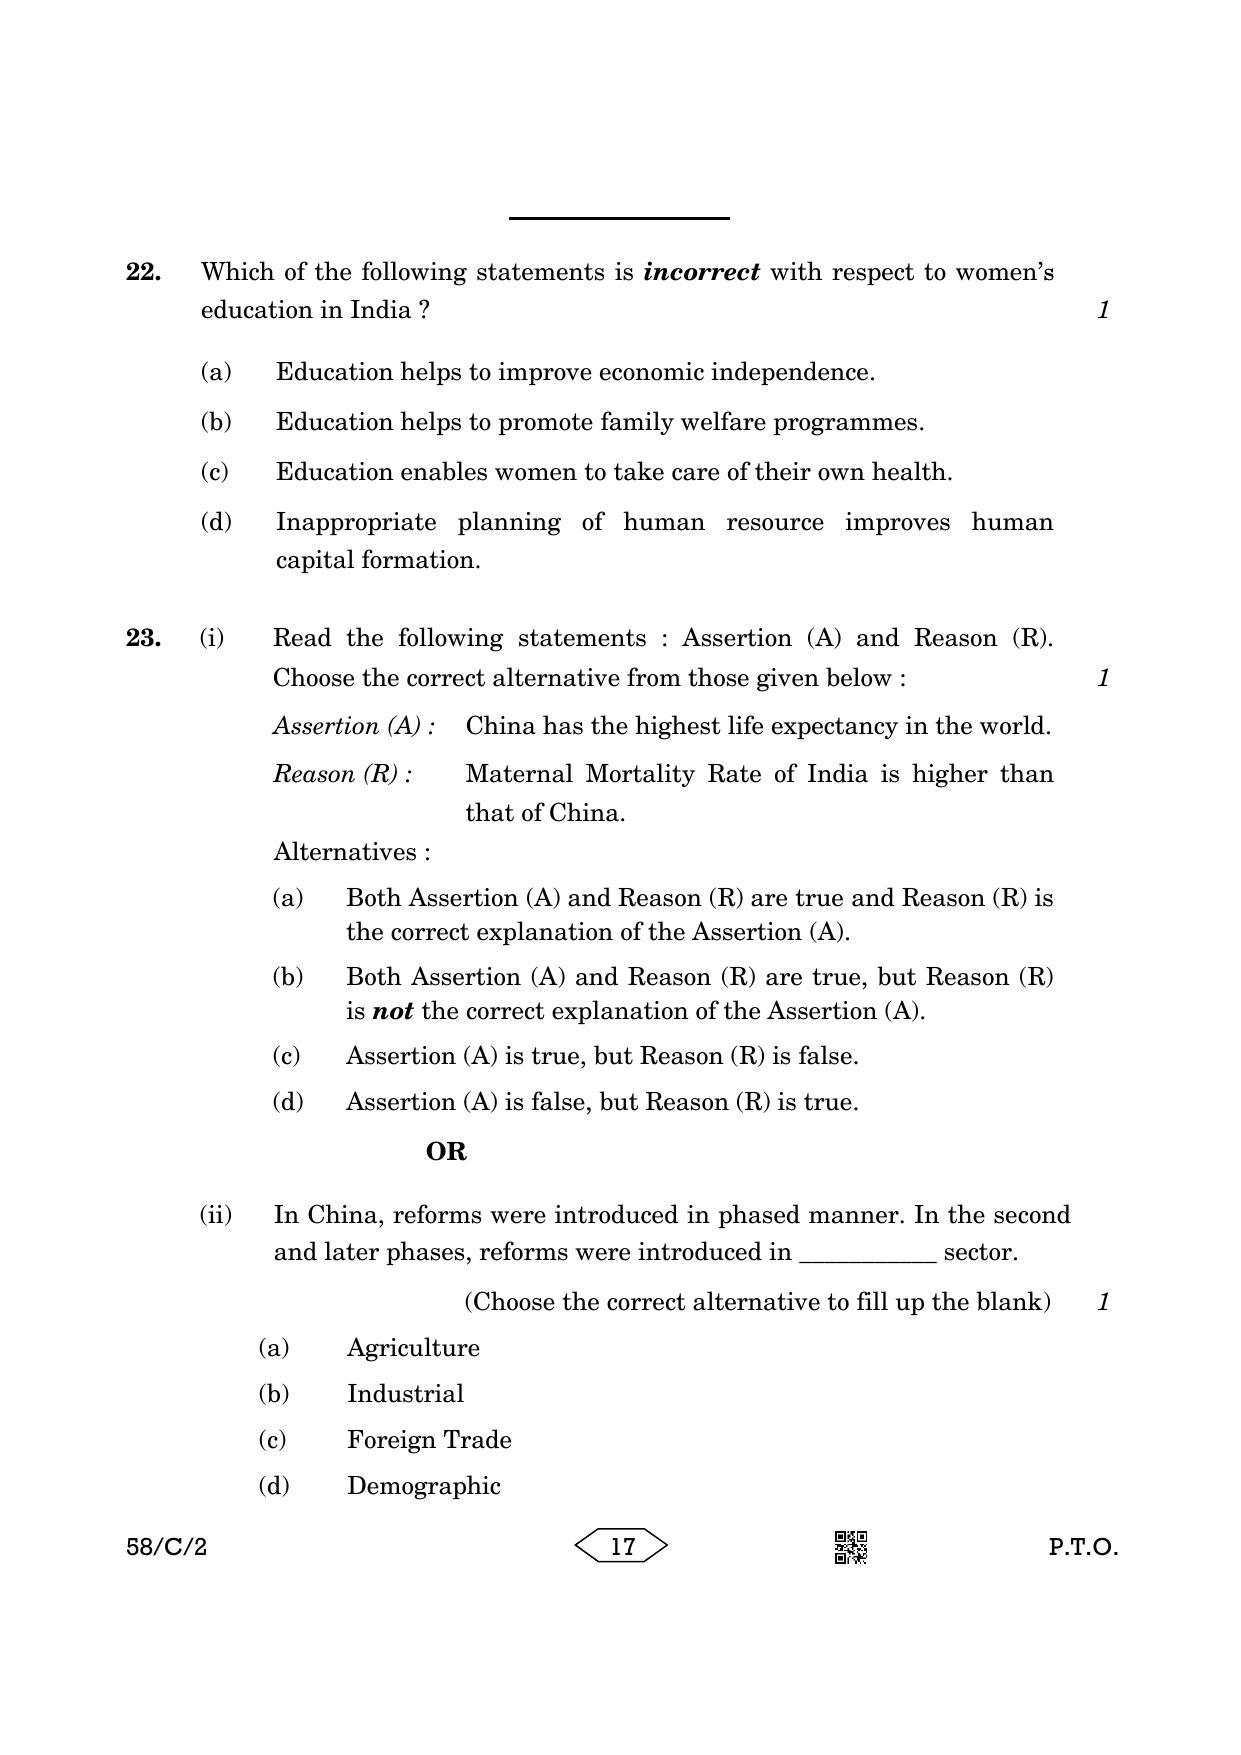 CBSE Class 12 58-2 Chemistry 2023 (Compartment) Question Paper - Page 17